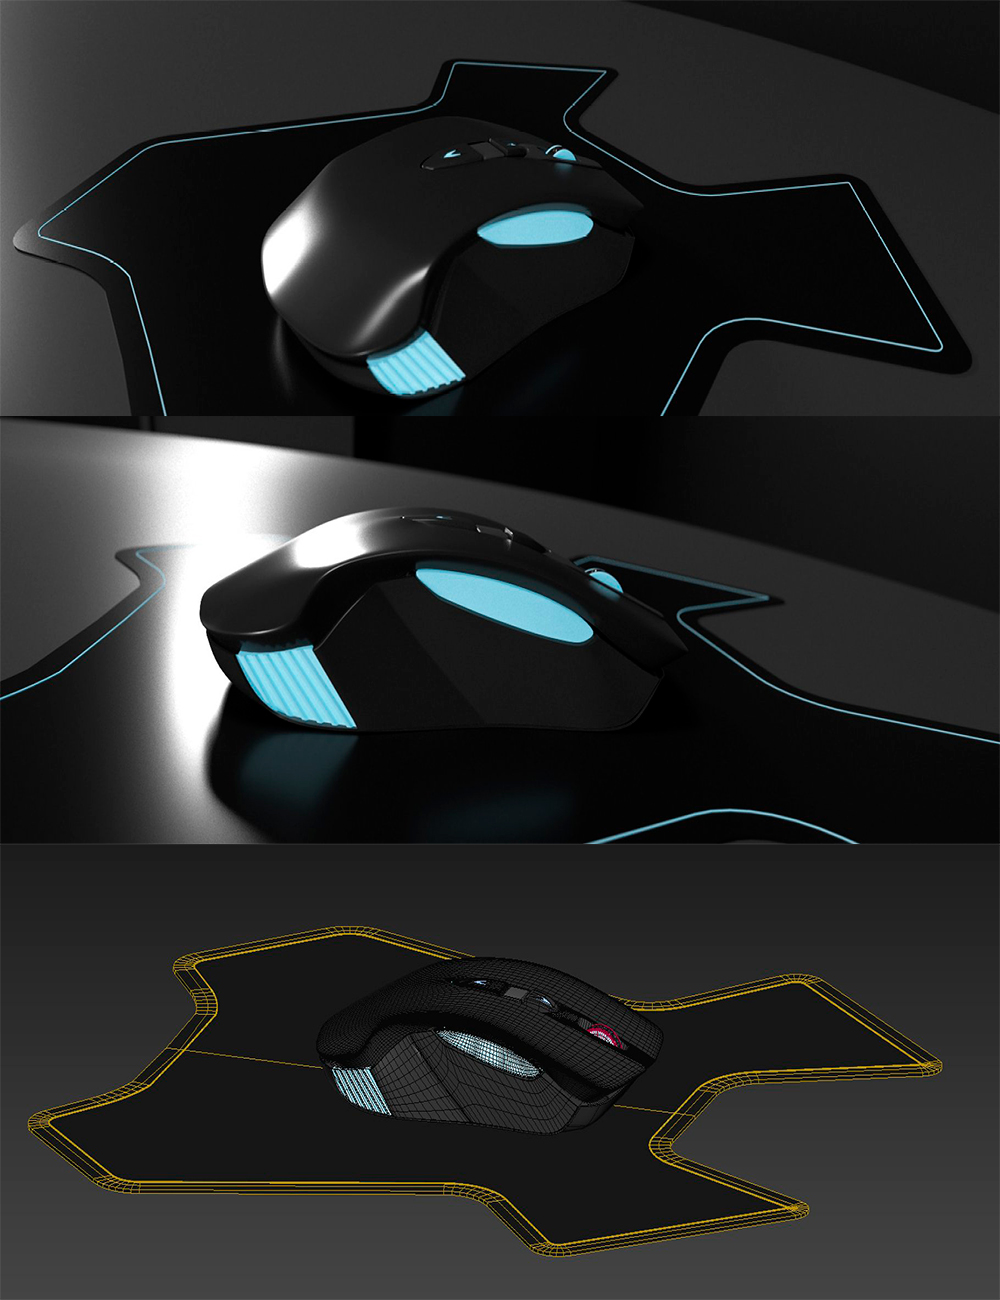 Rendering a beautiful 3d model of a gaming mouse